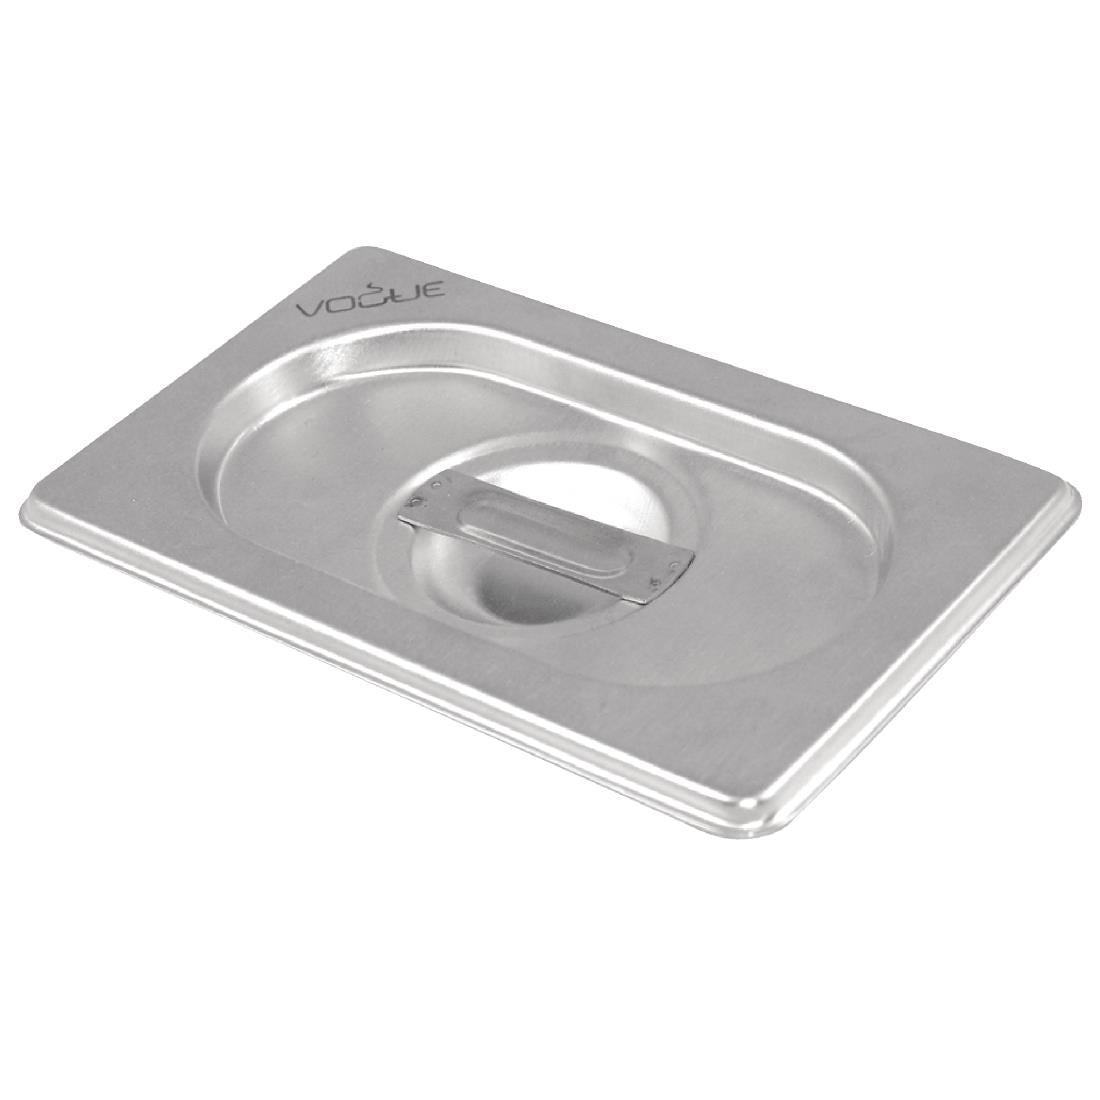 6 Pack of Stainless steel cover (lid) for GN pan 1/3